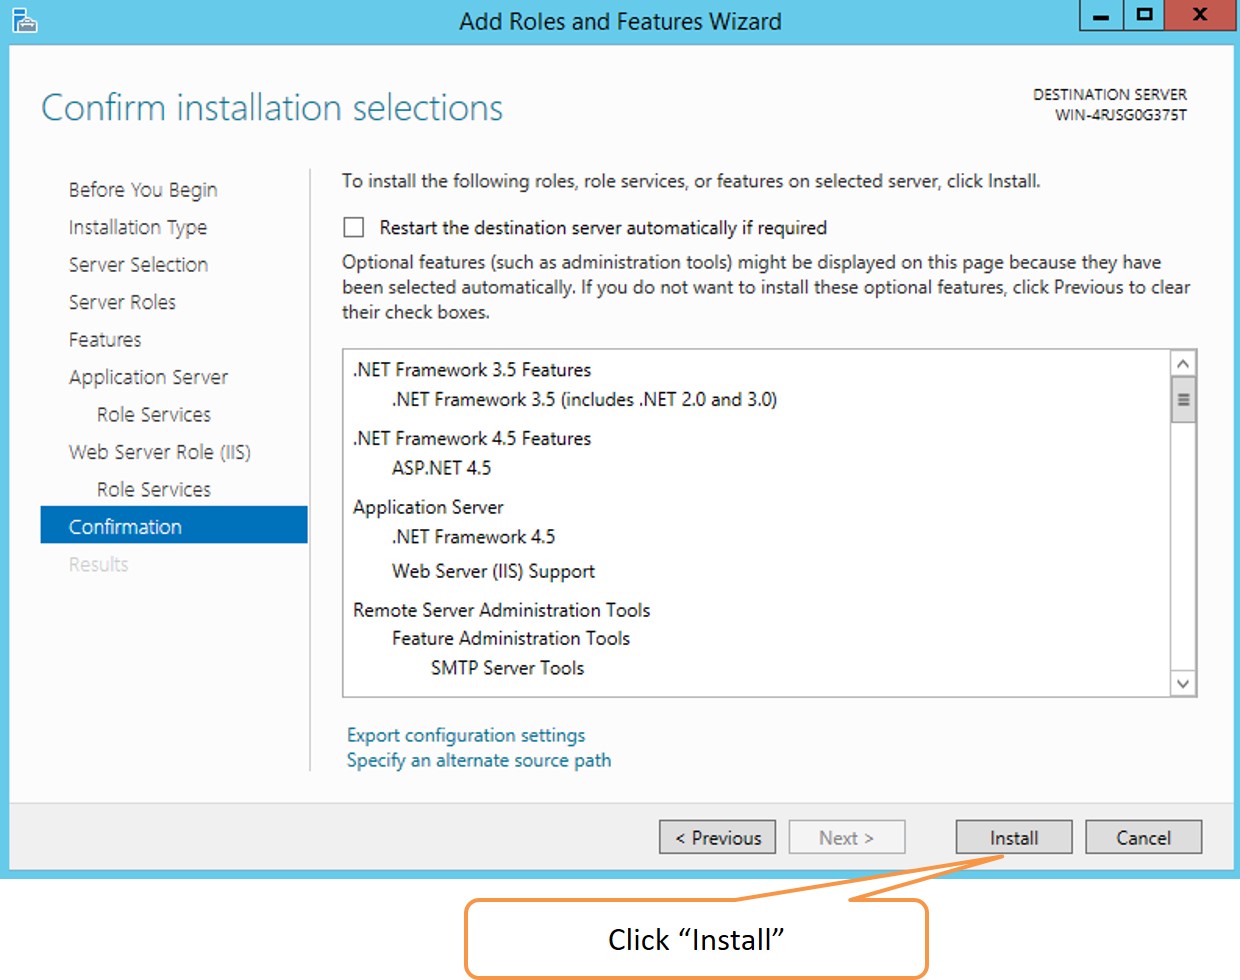 Required features for windows 2012 standart edition